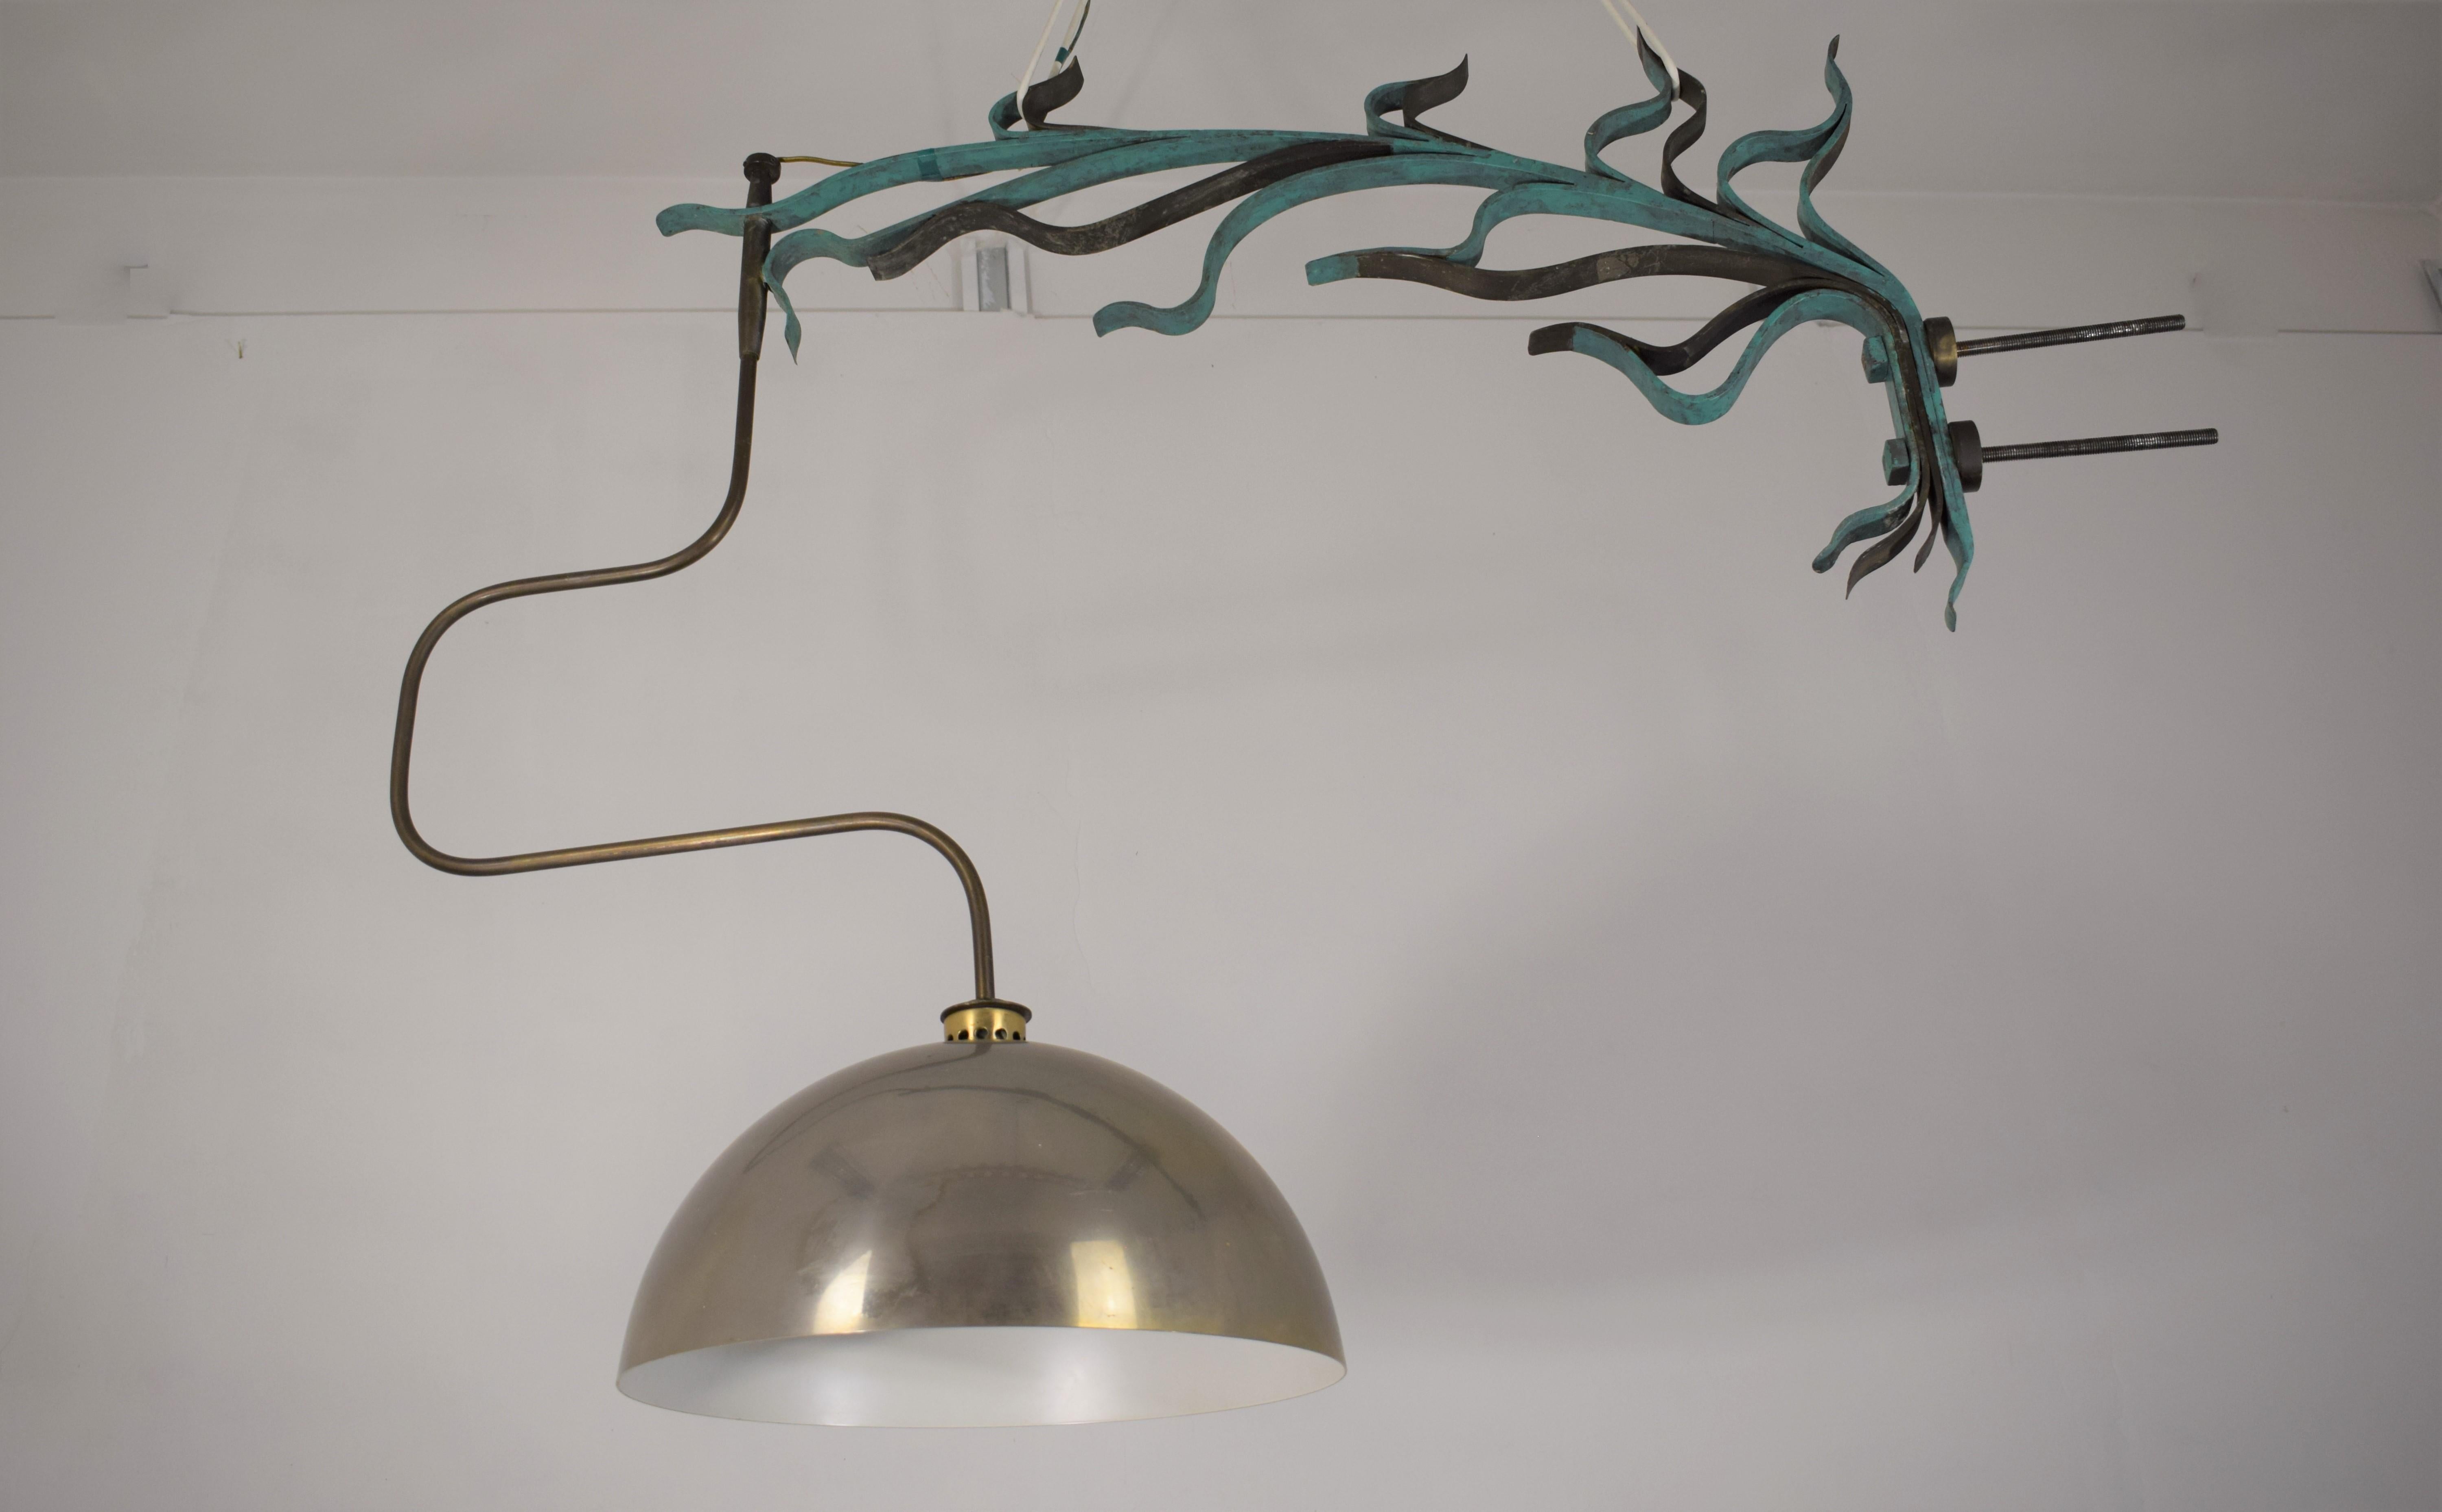 Italian adjustable wall lamp, 1960s.
Dimensions: H= 105 cm; W= 45 cm; W= 130 cm.
Brass, iron and painted metal.